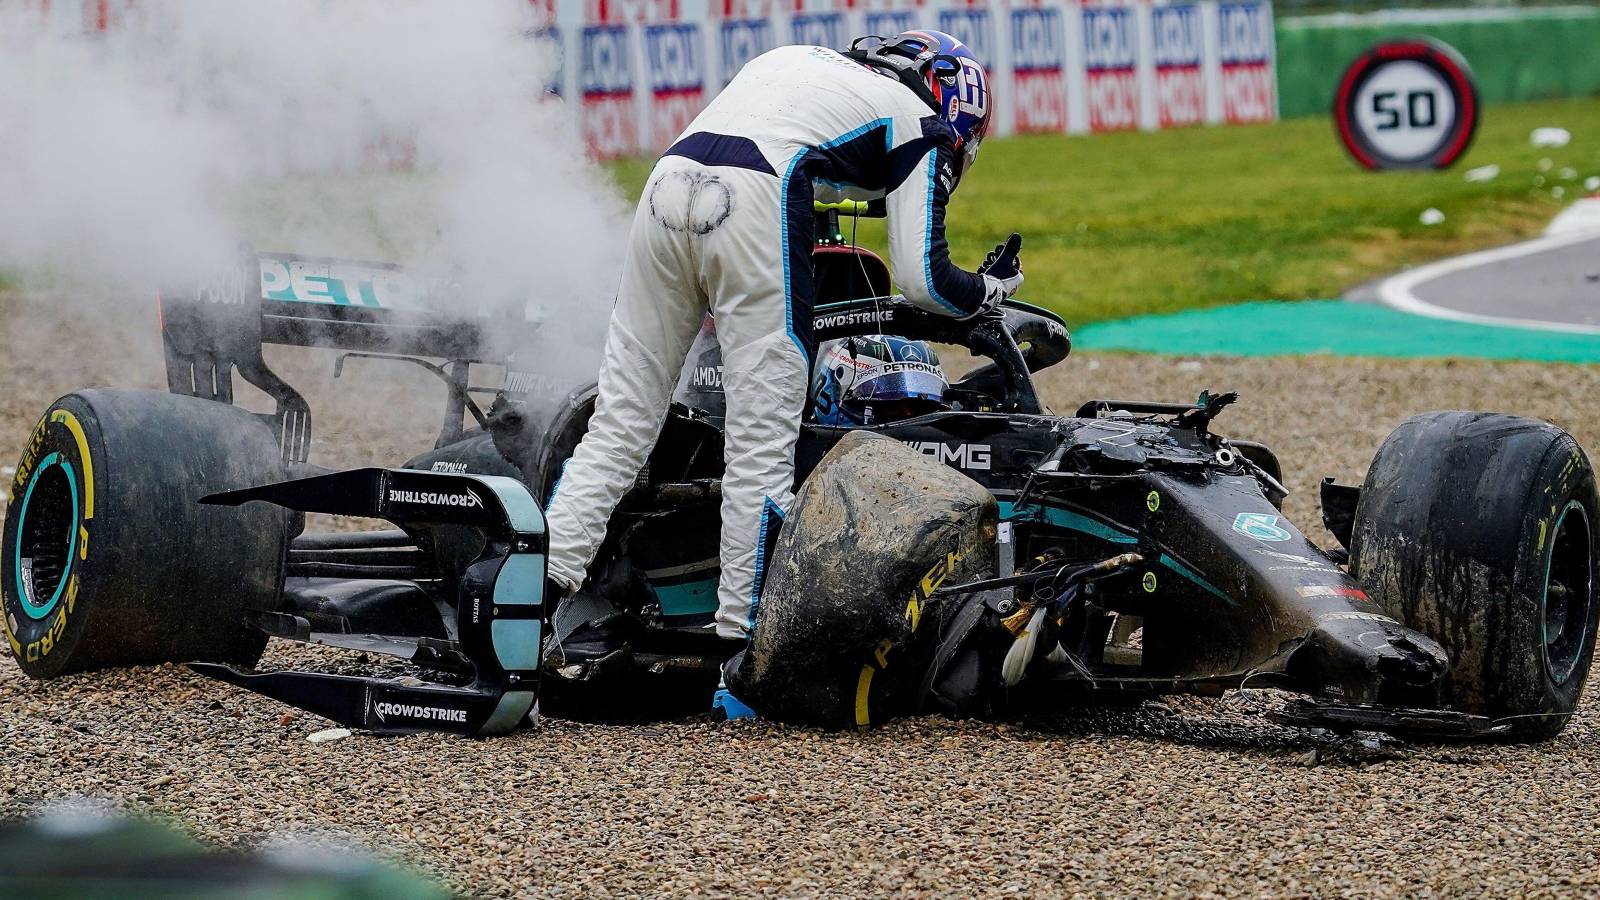 George Russell confronts Valtteri Bottas after their Imola crash. Italy, April 2021.